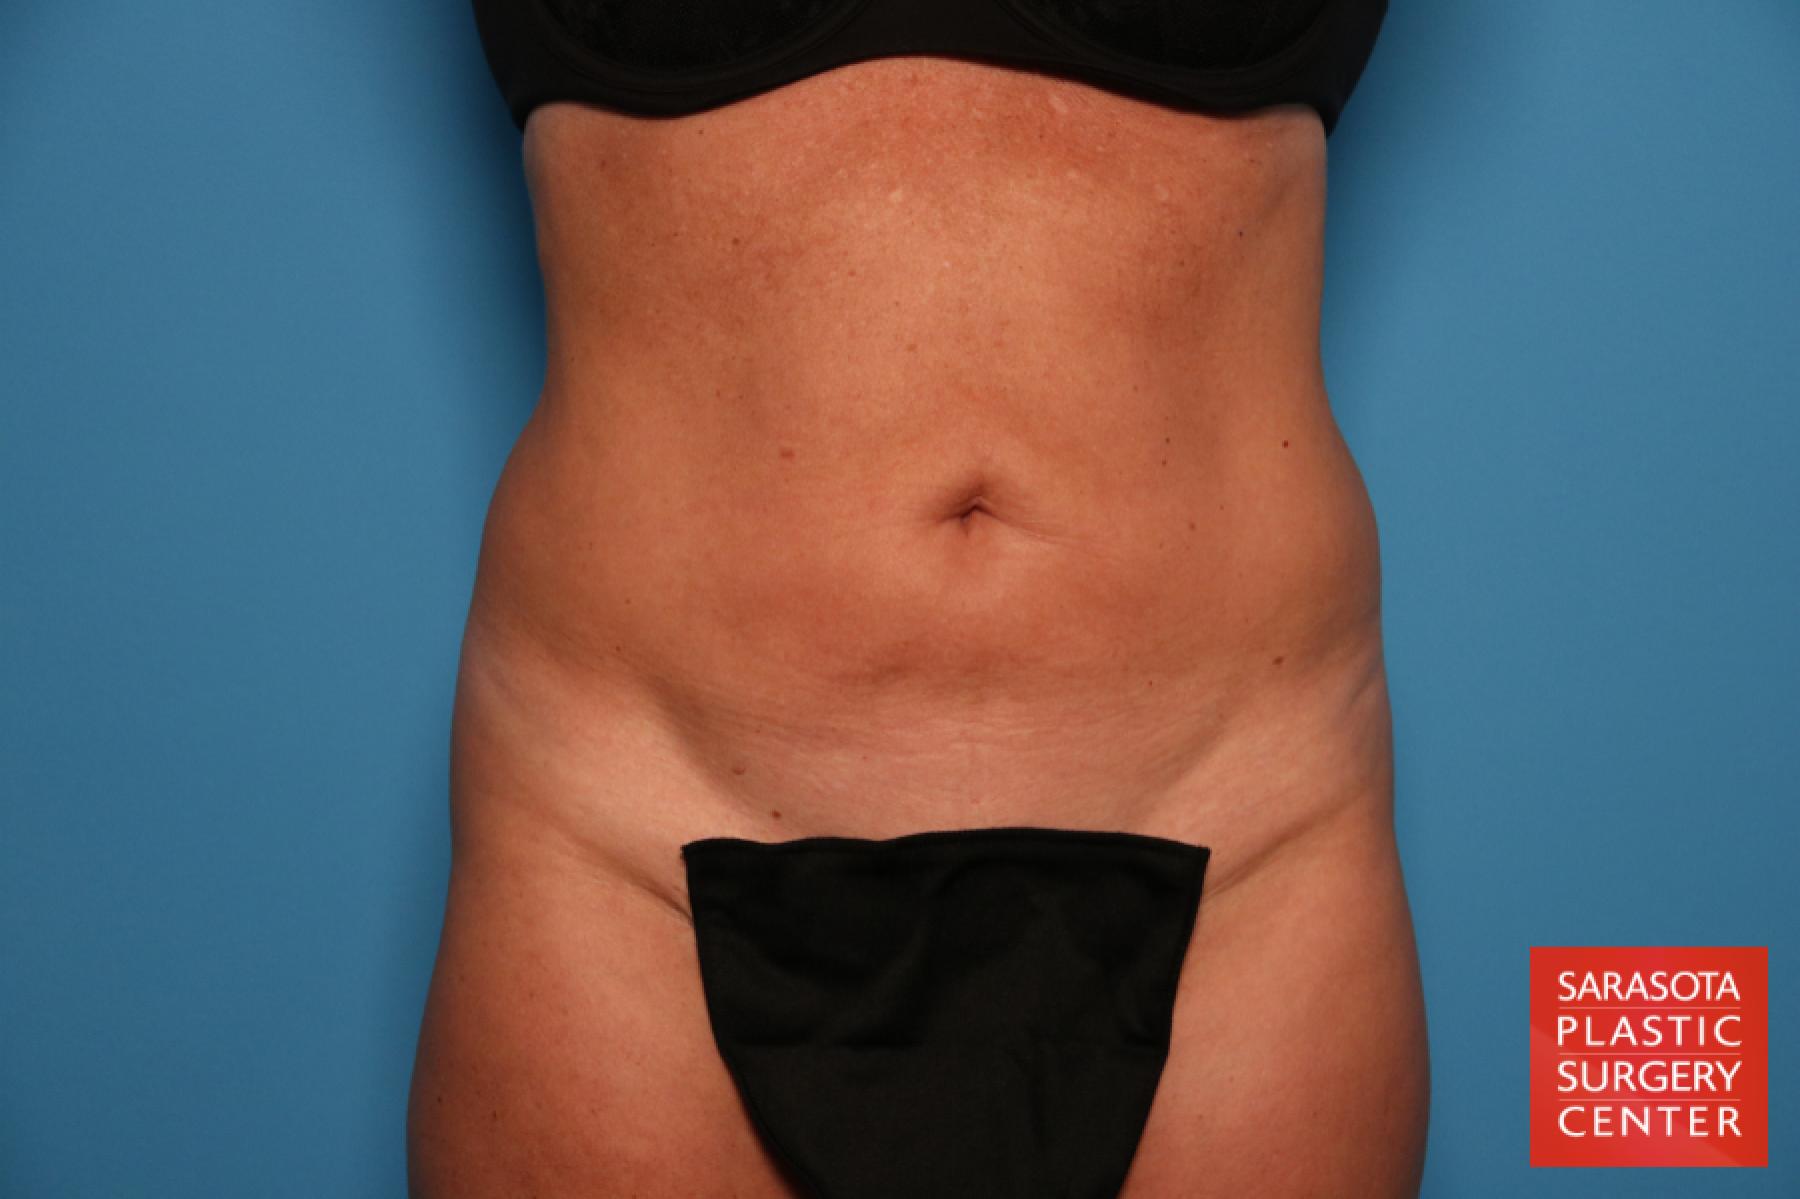 Tummy Tuck: Patient 10 - Before 